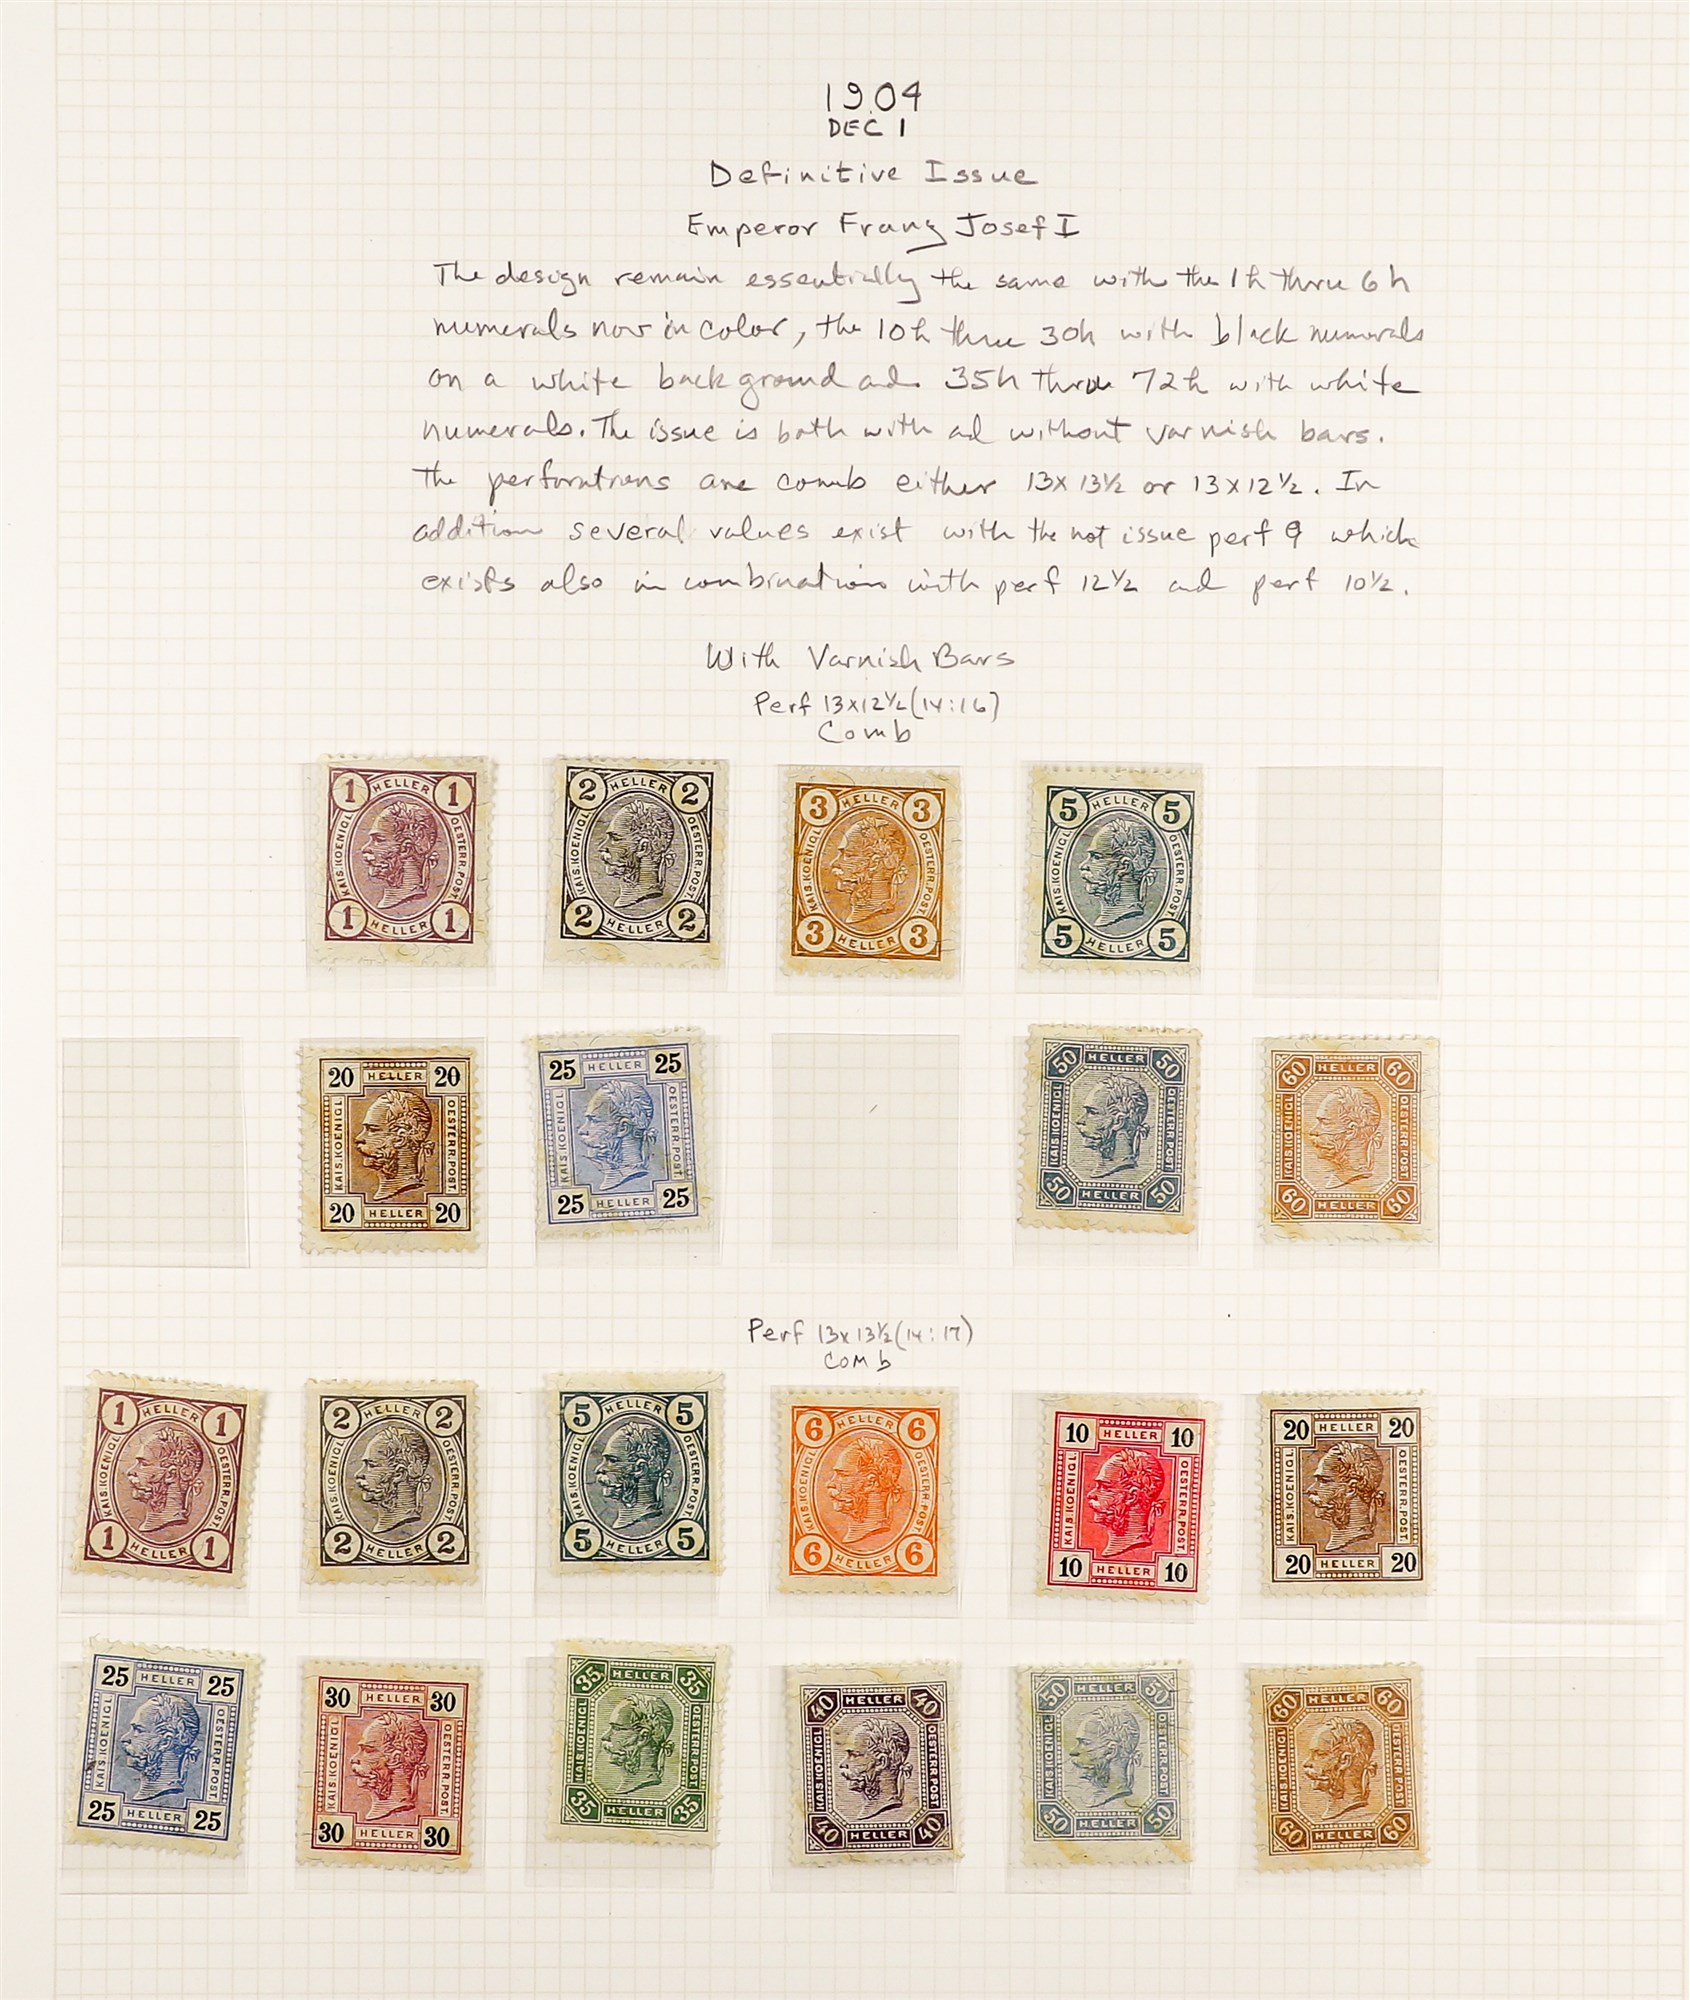 AUSTRIA 1890 - 1907 FRANZ JOSEF DEFINITIVES collection of over 180 mint / some never hinged mint - Image 9 of 11